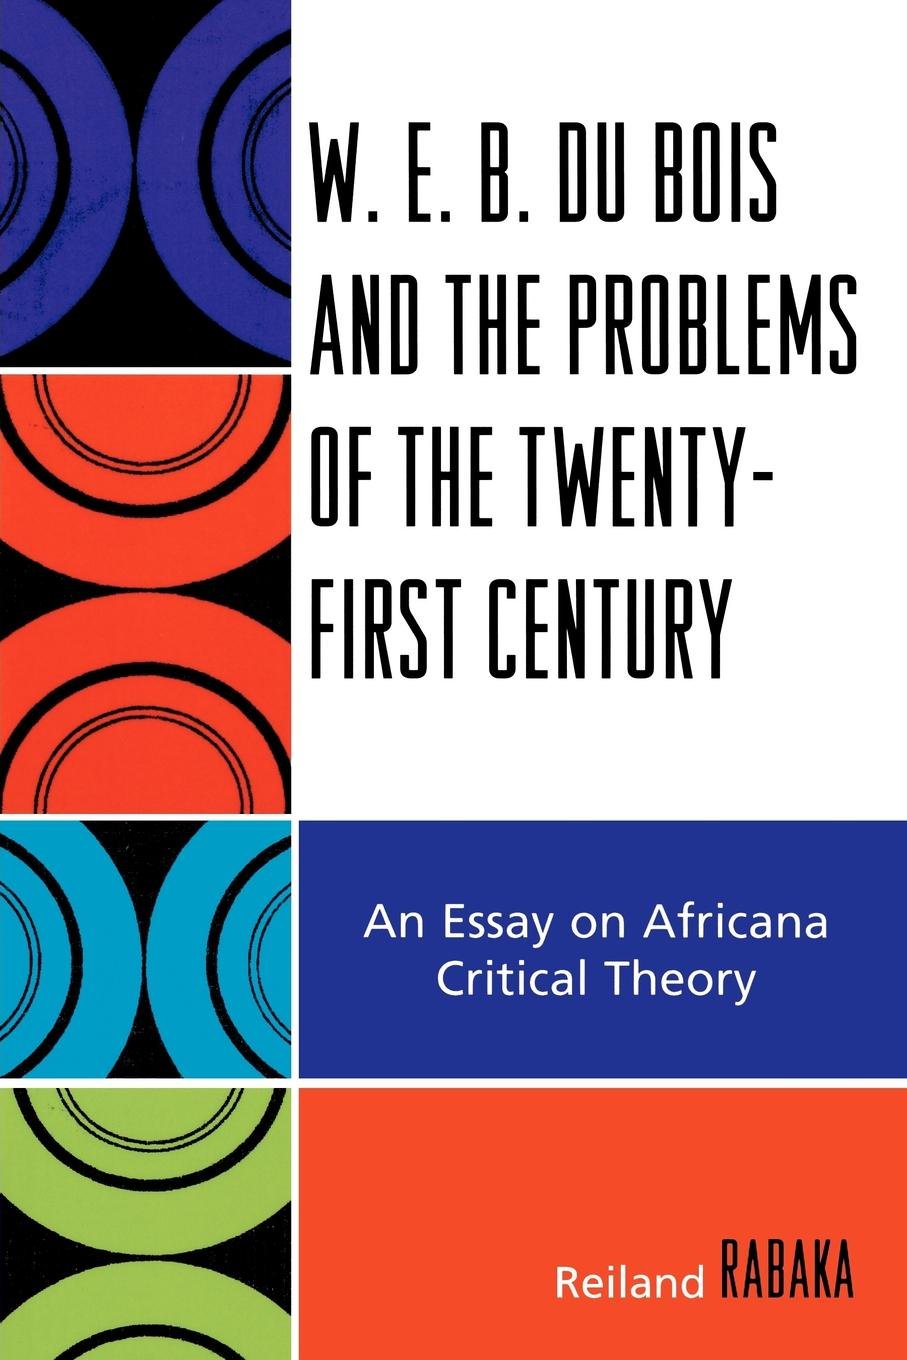 W.E.B. Du Bois and the Problems of the Twenty-First Century: An Essay on Africana Critical Theory